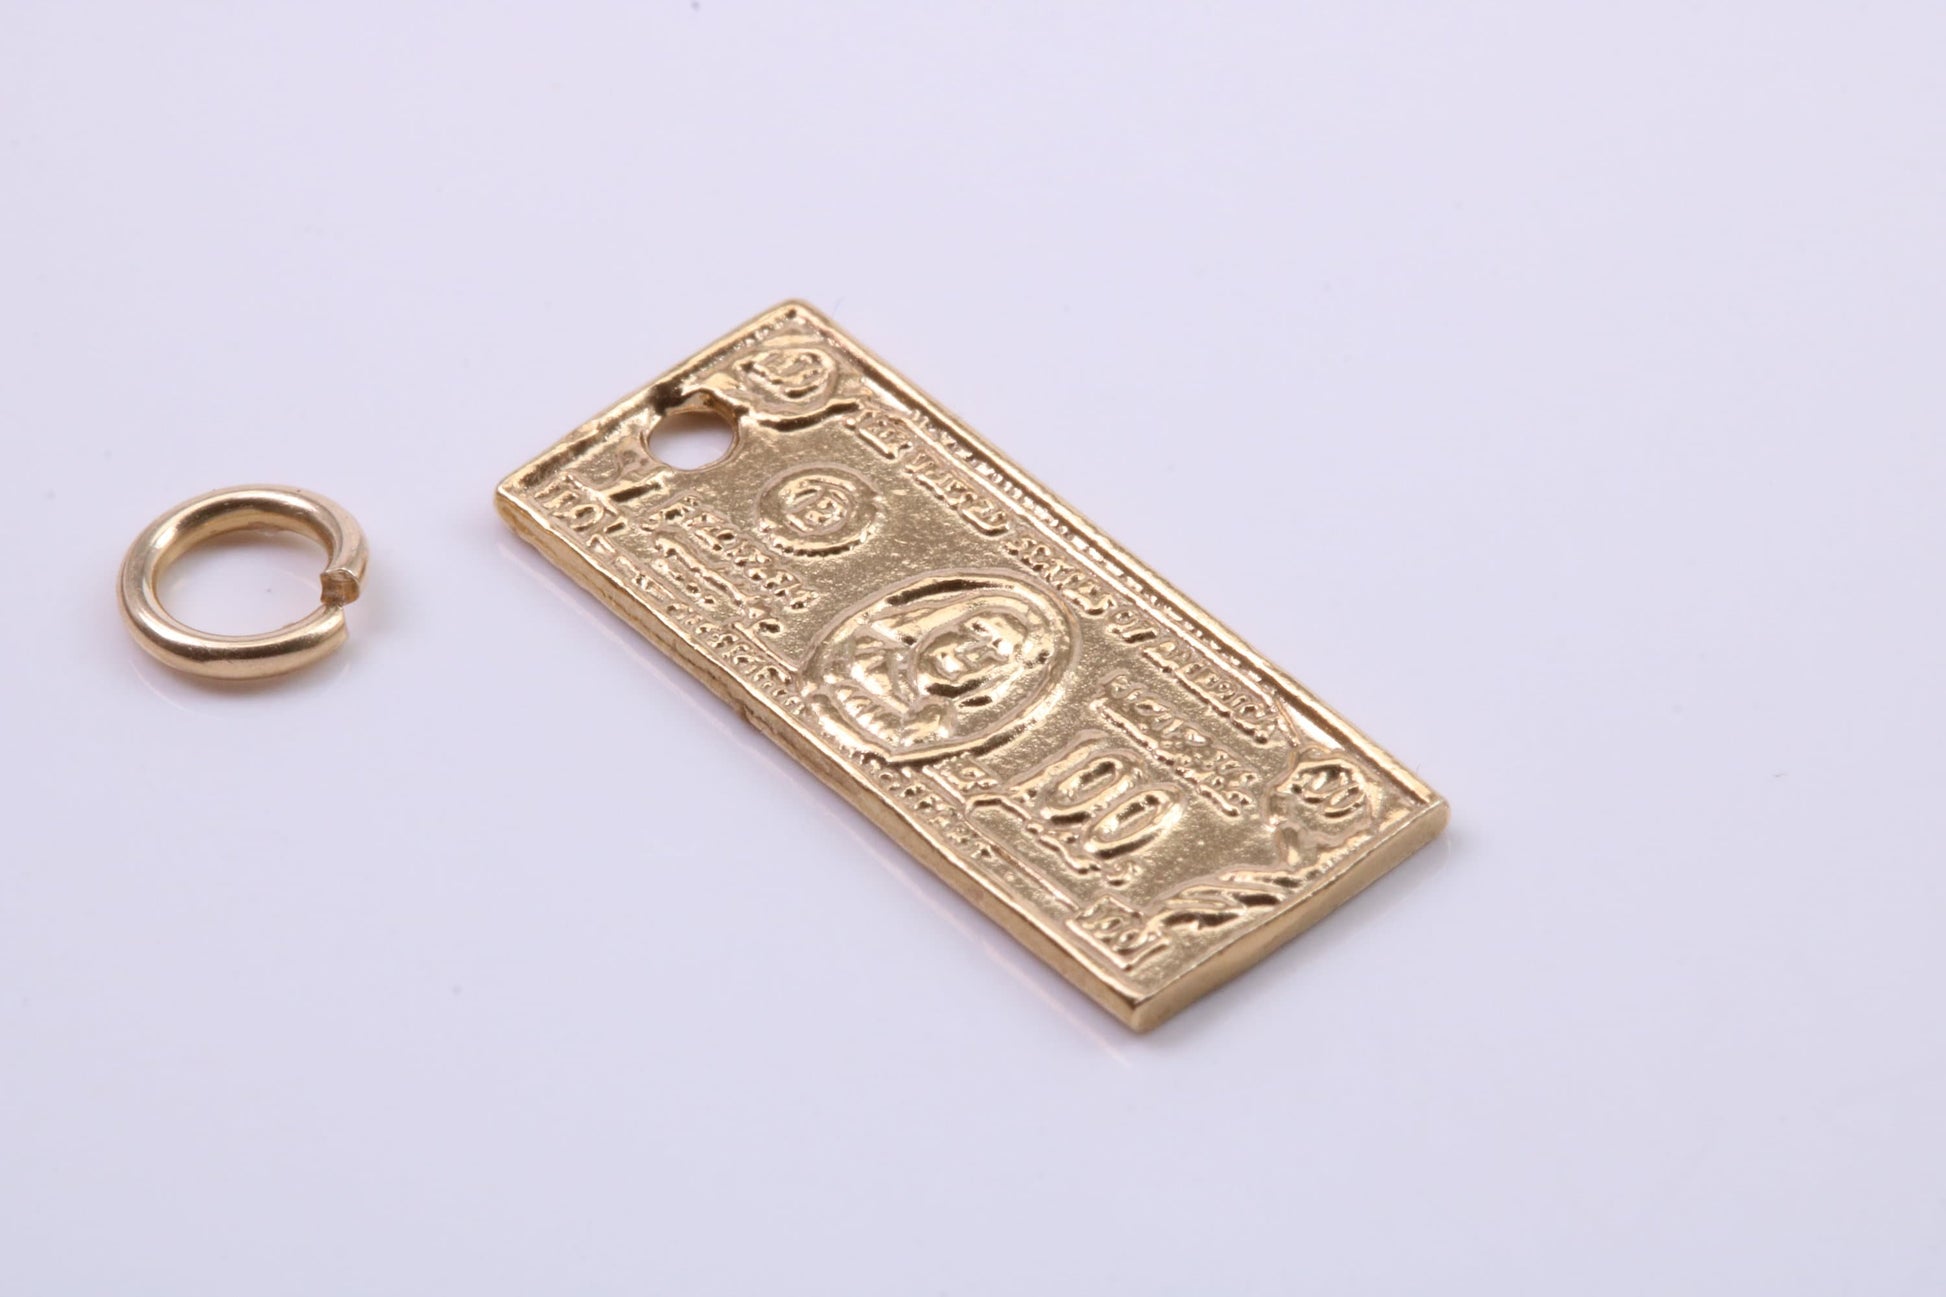 100 Dollar Bill Charm, Traditional Charm, Made from Solid 9ct Yellow Gold, British Hallmarked, Complete with Attachment Link